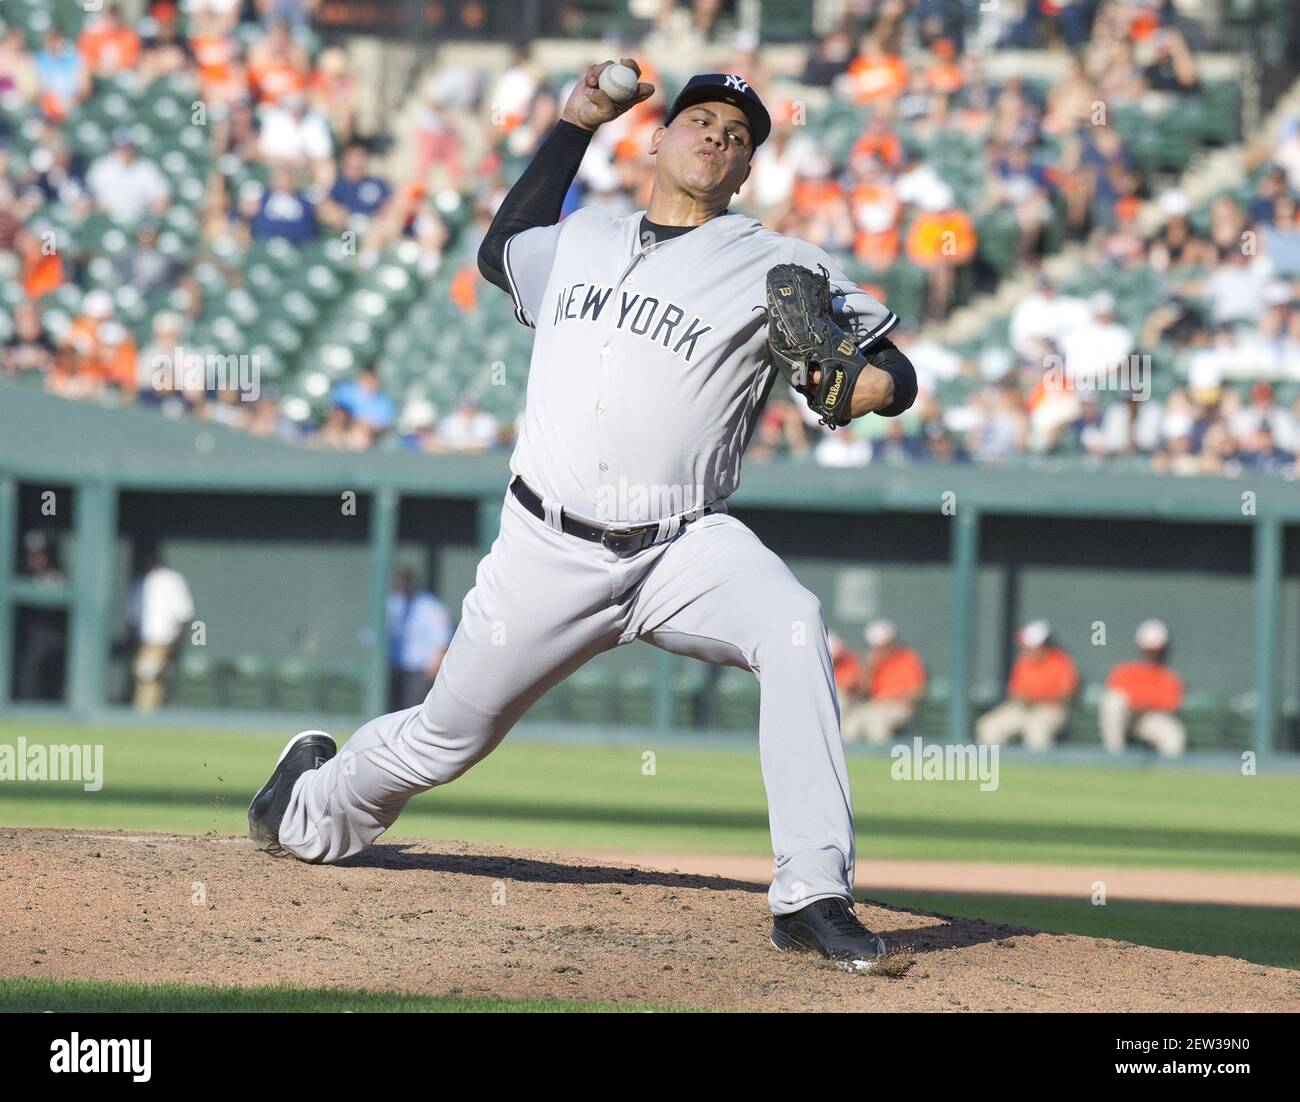 New York Yankees relief pitcher Dellin Betances (68) pitches in the ninth  inning against the Baltimore Orioles at Oriole Park at Camden Yards in  Baltimore, MD on Monday, September 4, 2017. The